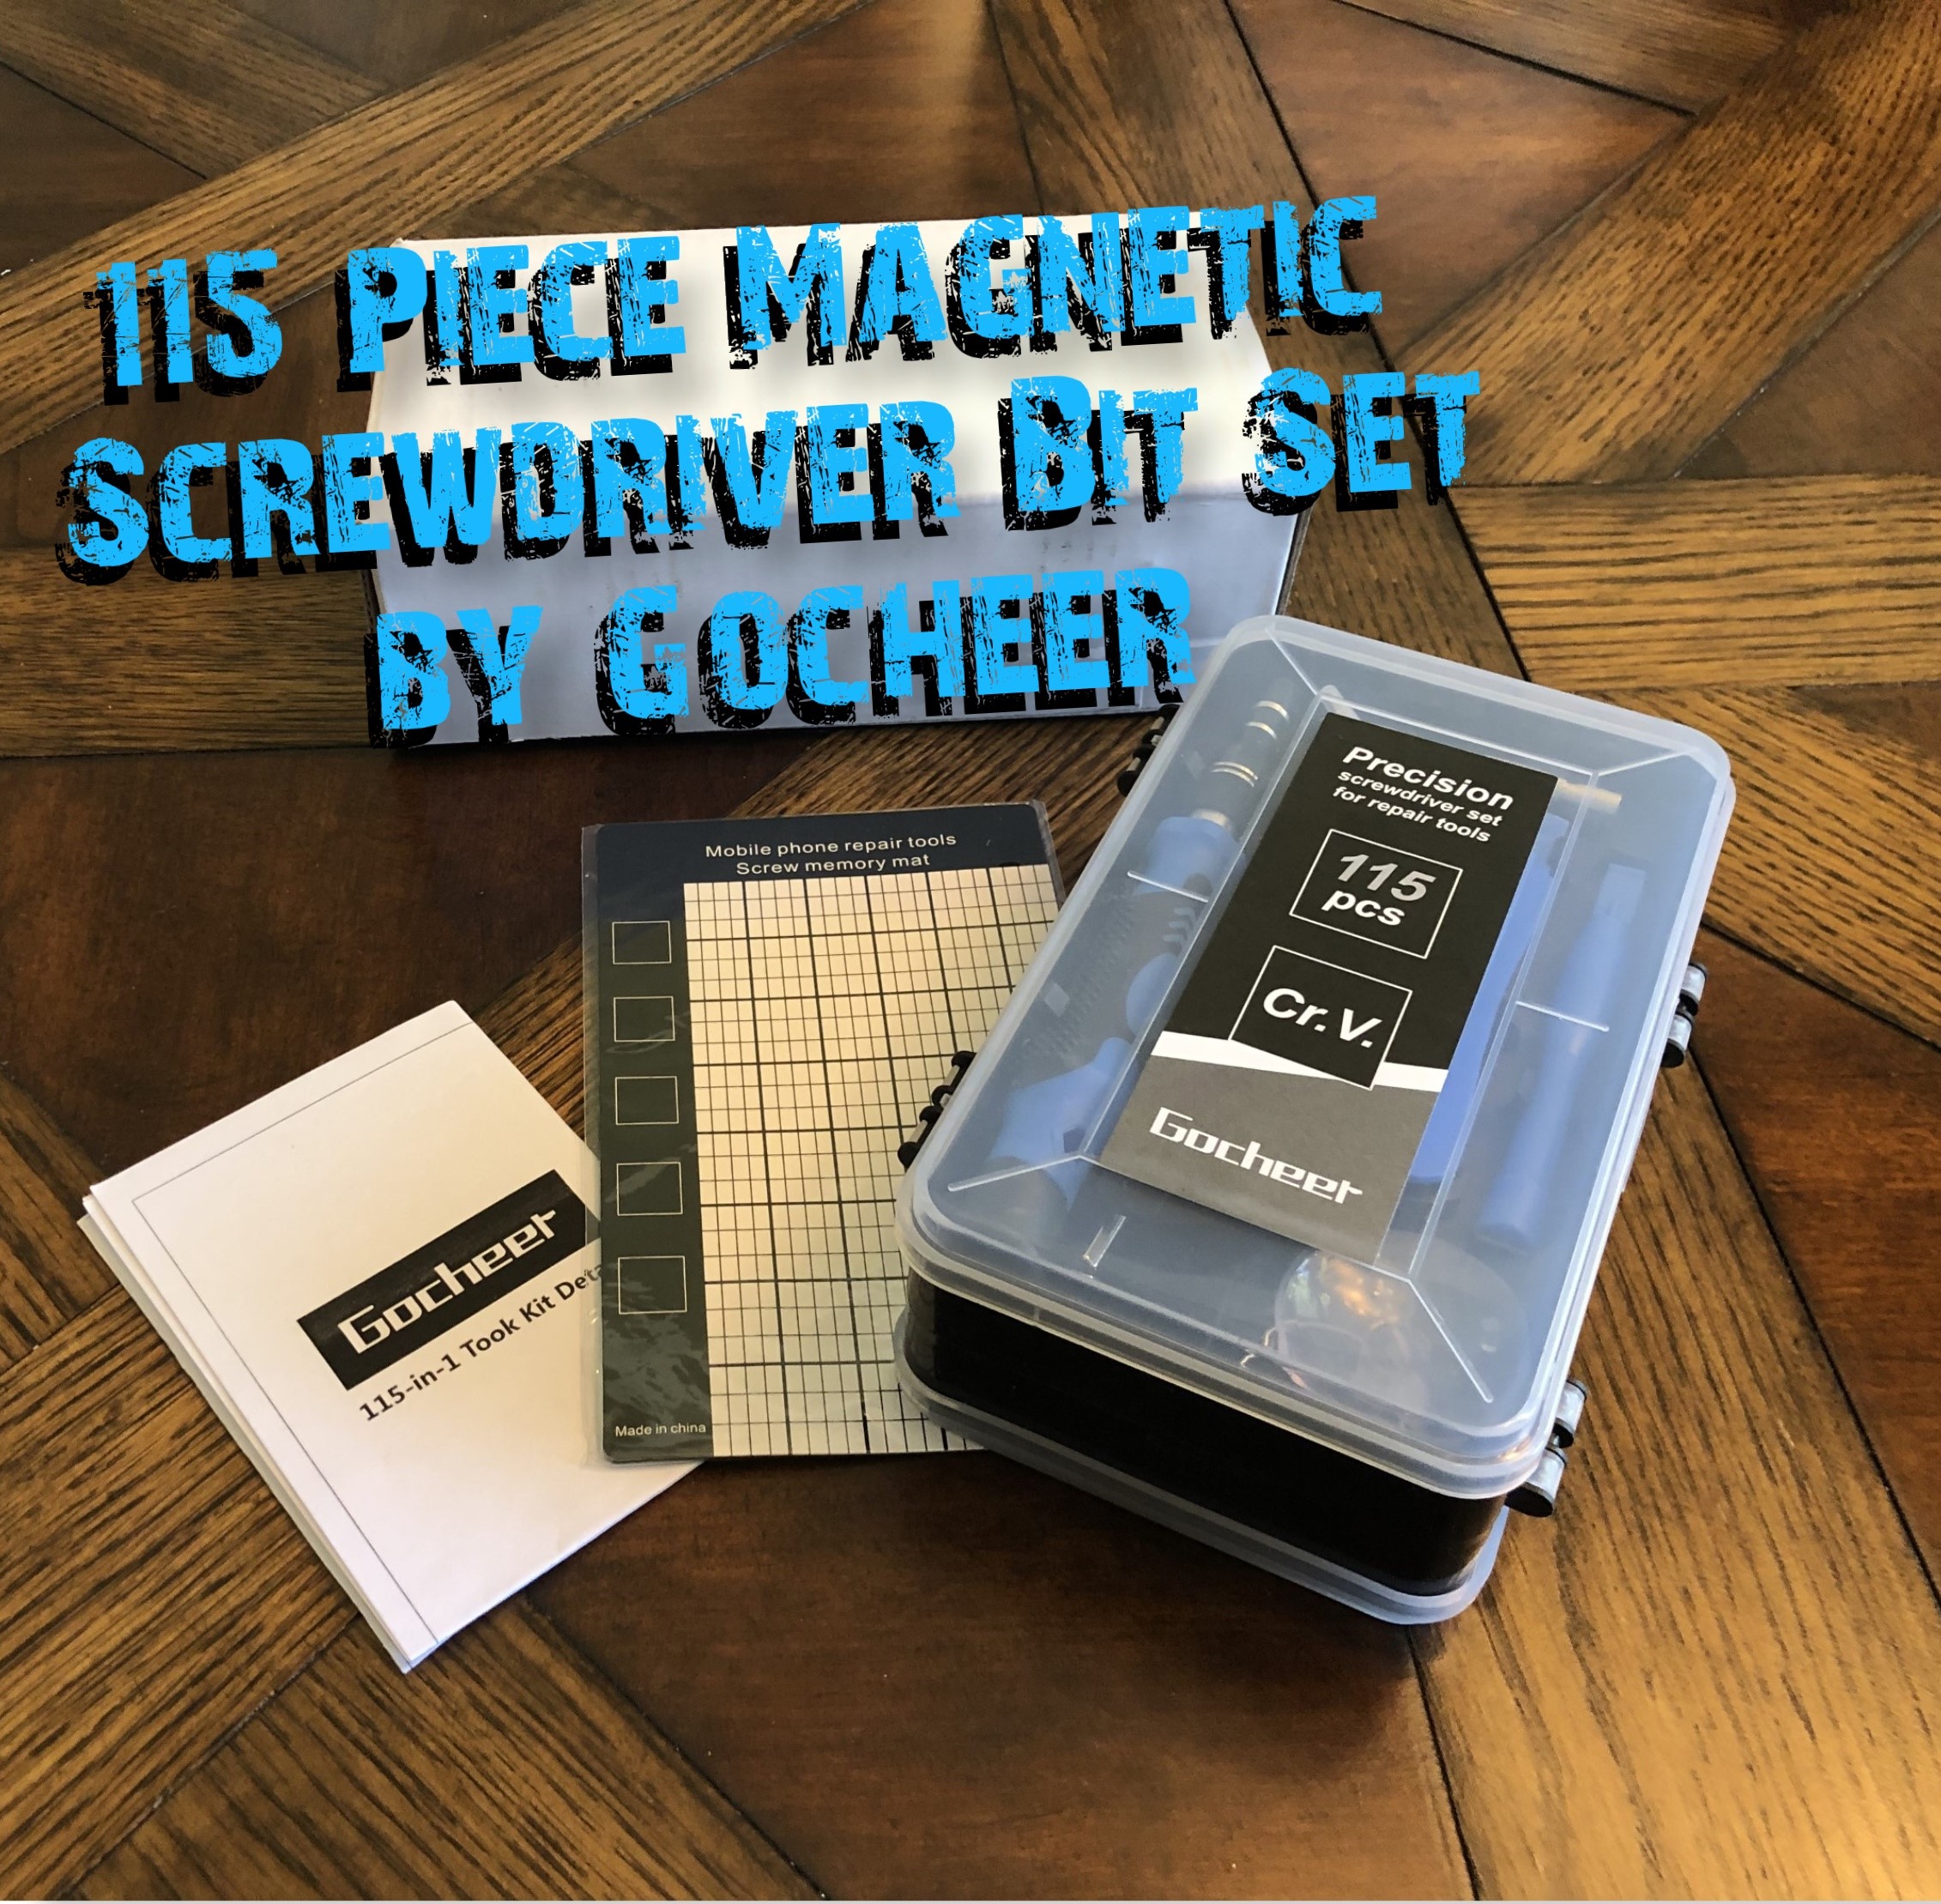 Review of the: 115 Piece Magnetic Screwdriver Bit Set (Blue) by Gocheer